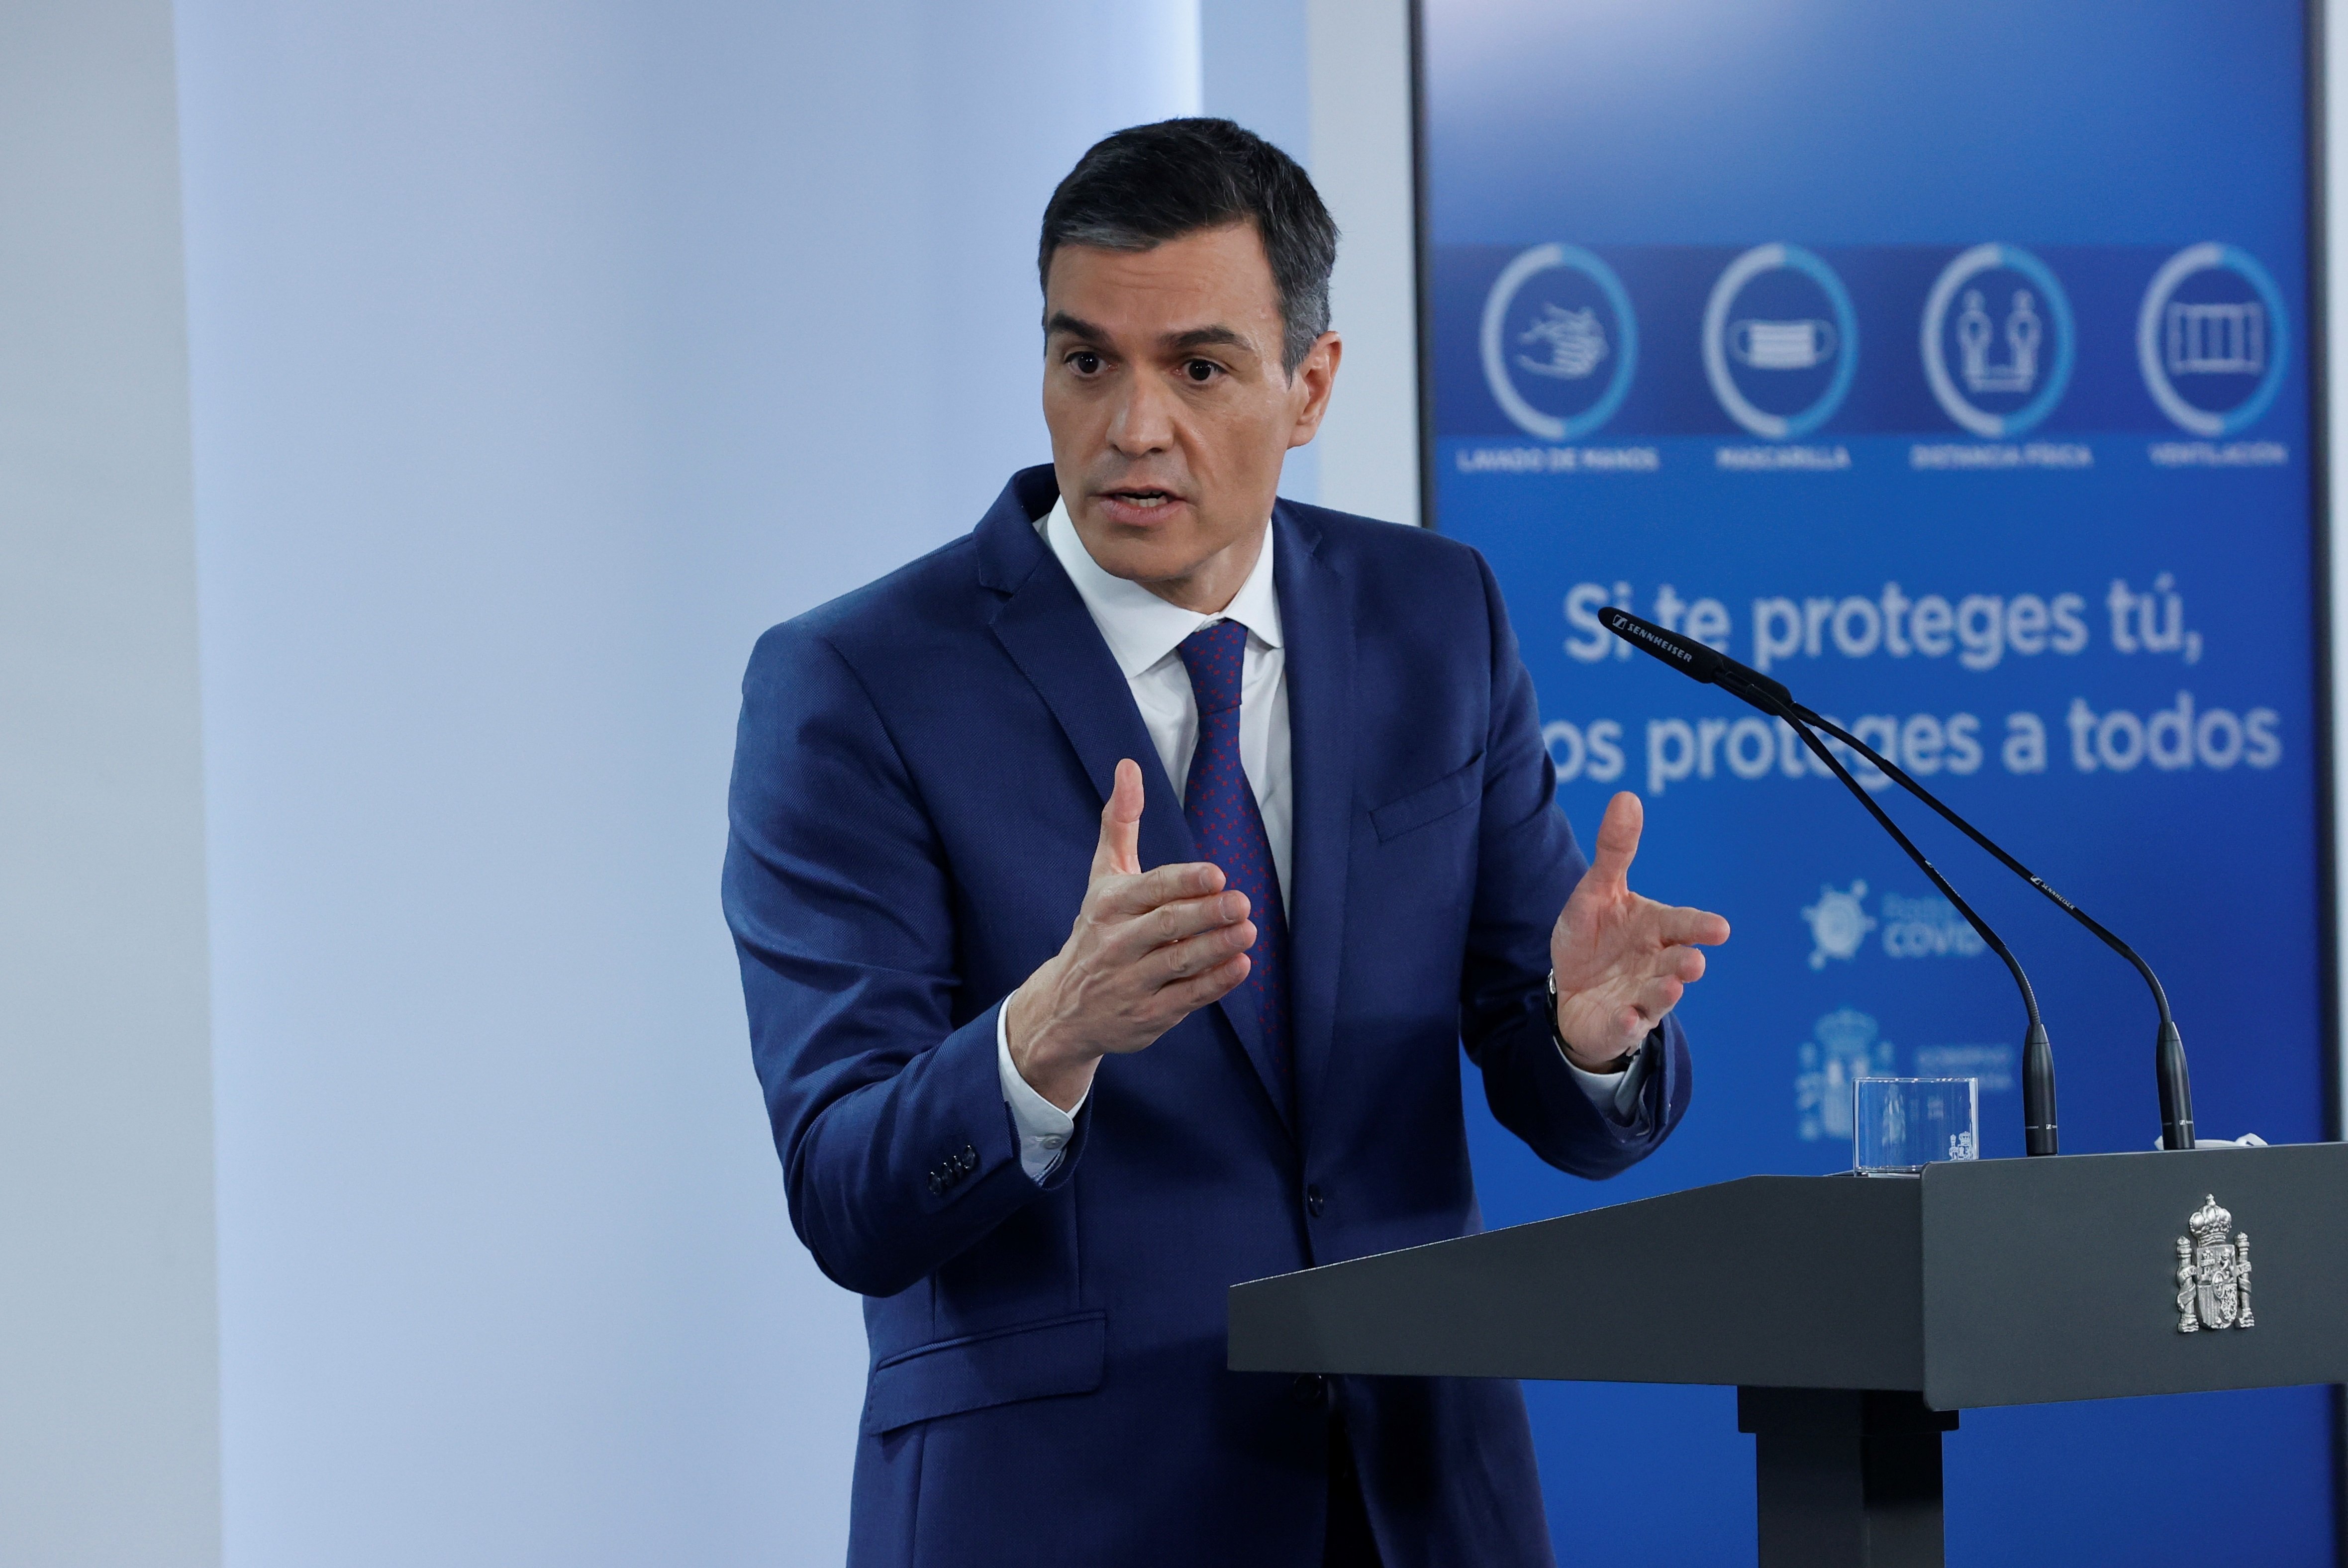 Sánchez promises to vaccinate 33 million Spaniards by August in upbeat speech